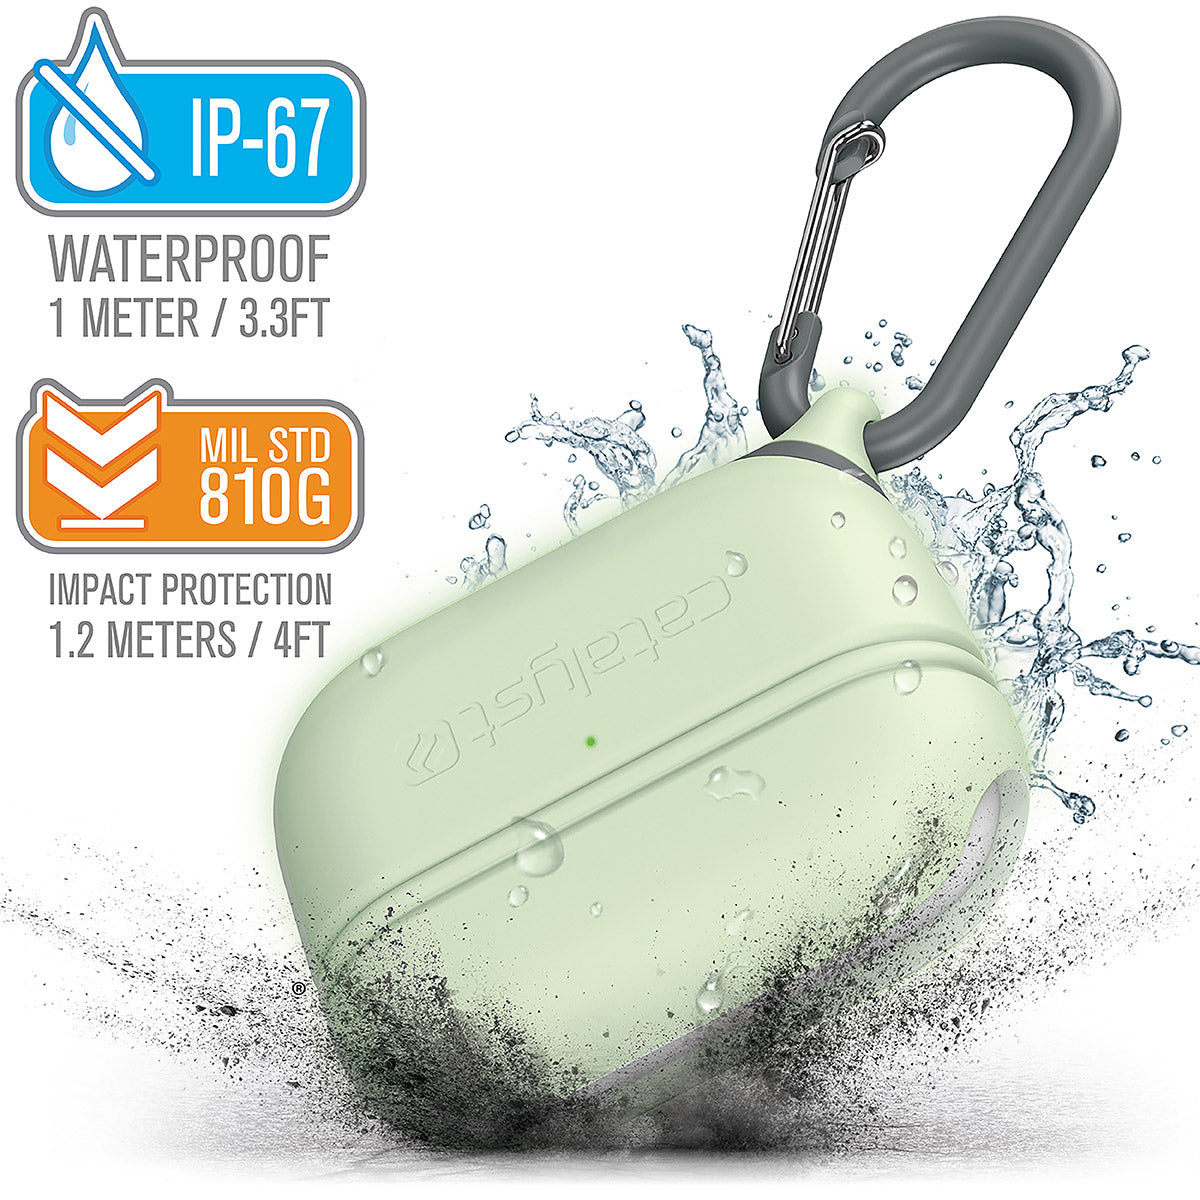 CATAPLAPDPROGITD | catalyst airpods pro gen 2 1 waterproof case carabiner special edition glow in the dark with cracked floor and splashes of water text reads ip-67 waterproof 1 meter 3.3ft mil std 810g impact protection 1.2 meters 4ft